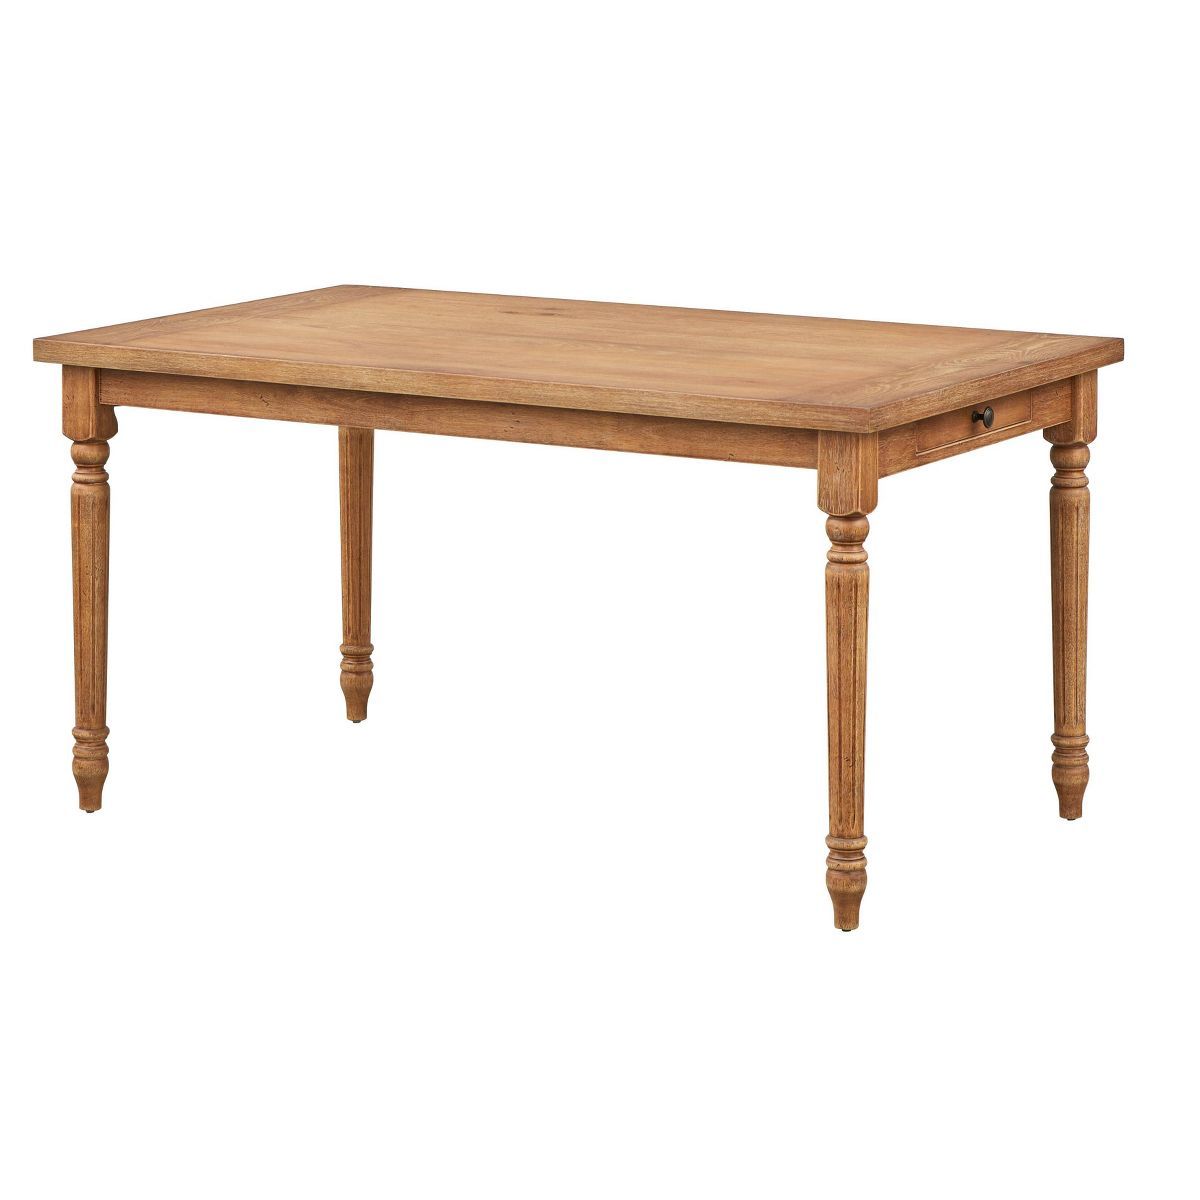 59" Toscana Wide Rectangular Dining Table with Drawers Driftwood - Lifestorey | Target